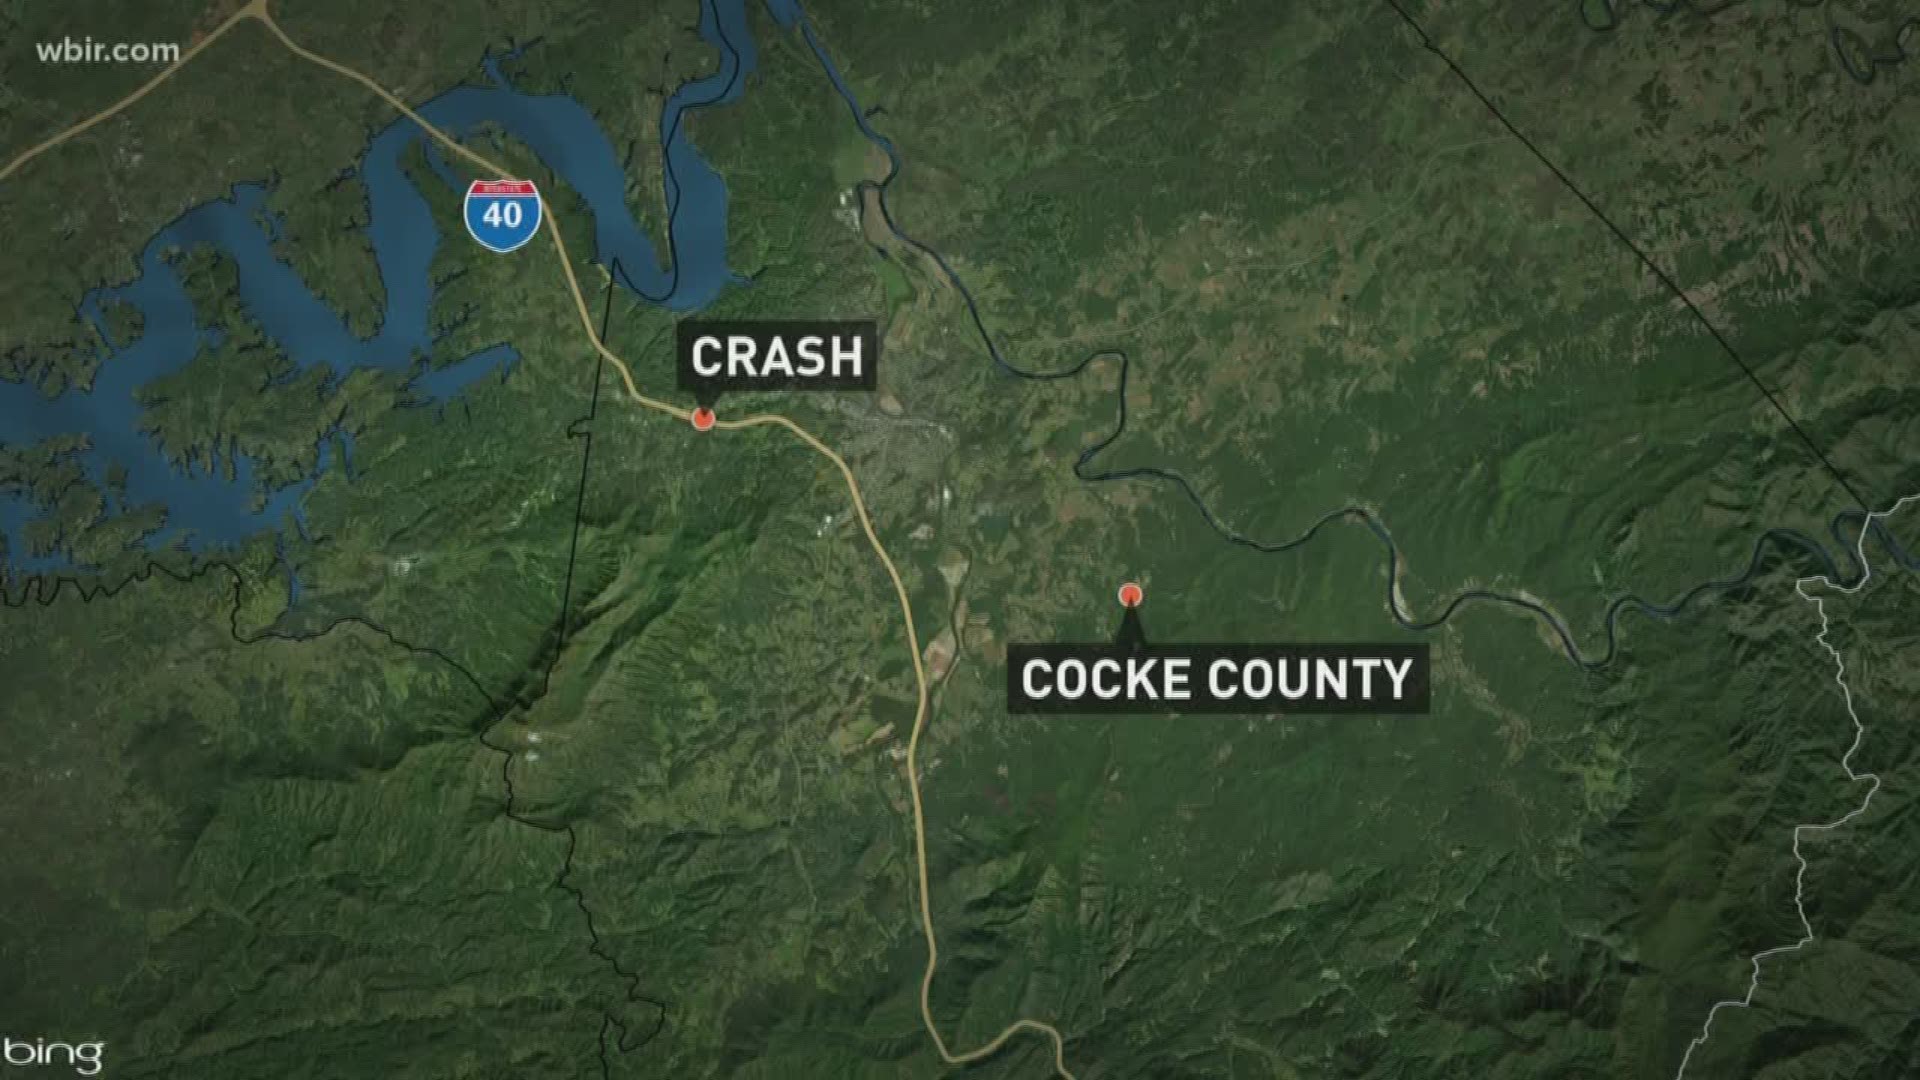 A woman from Virginia is dead and another person is injured after a motorcycle crash in Cocke County.